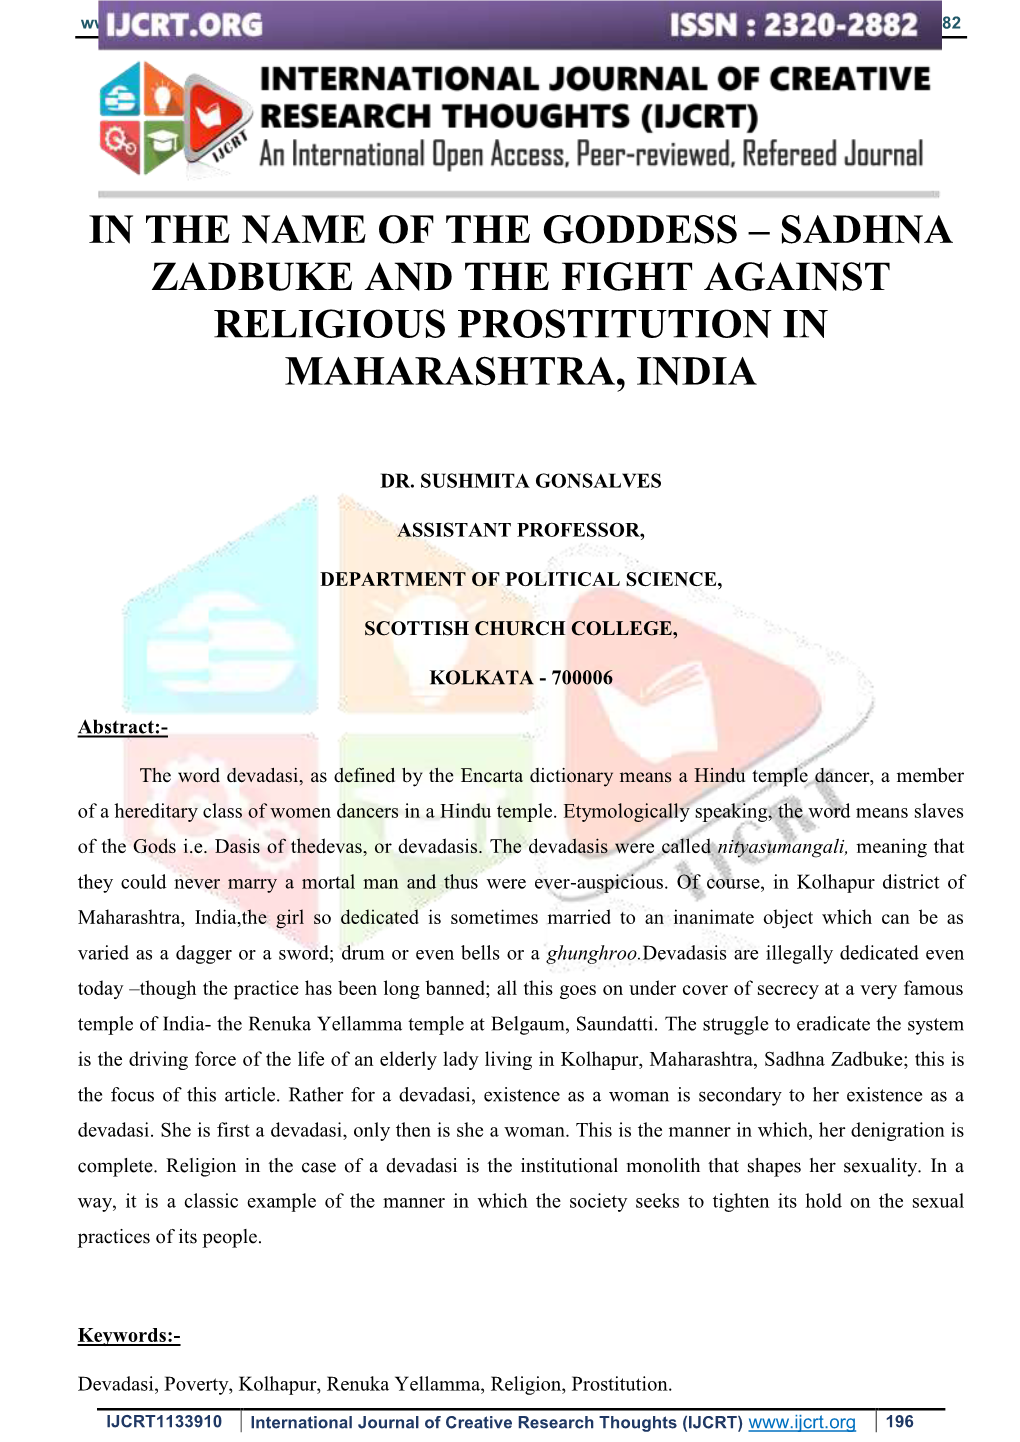 In the Name of the Goddess – Sadhna Zadbuke and the Fight Against Religious Prostitution in Maharashtra, India